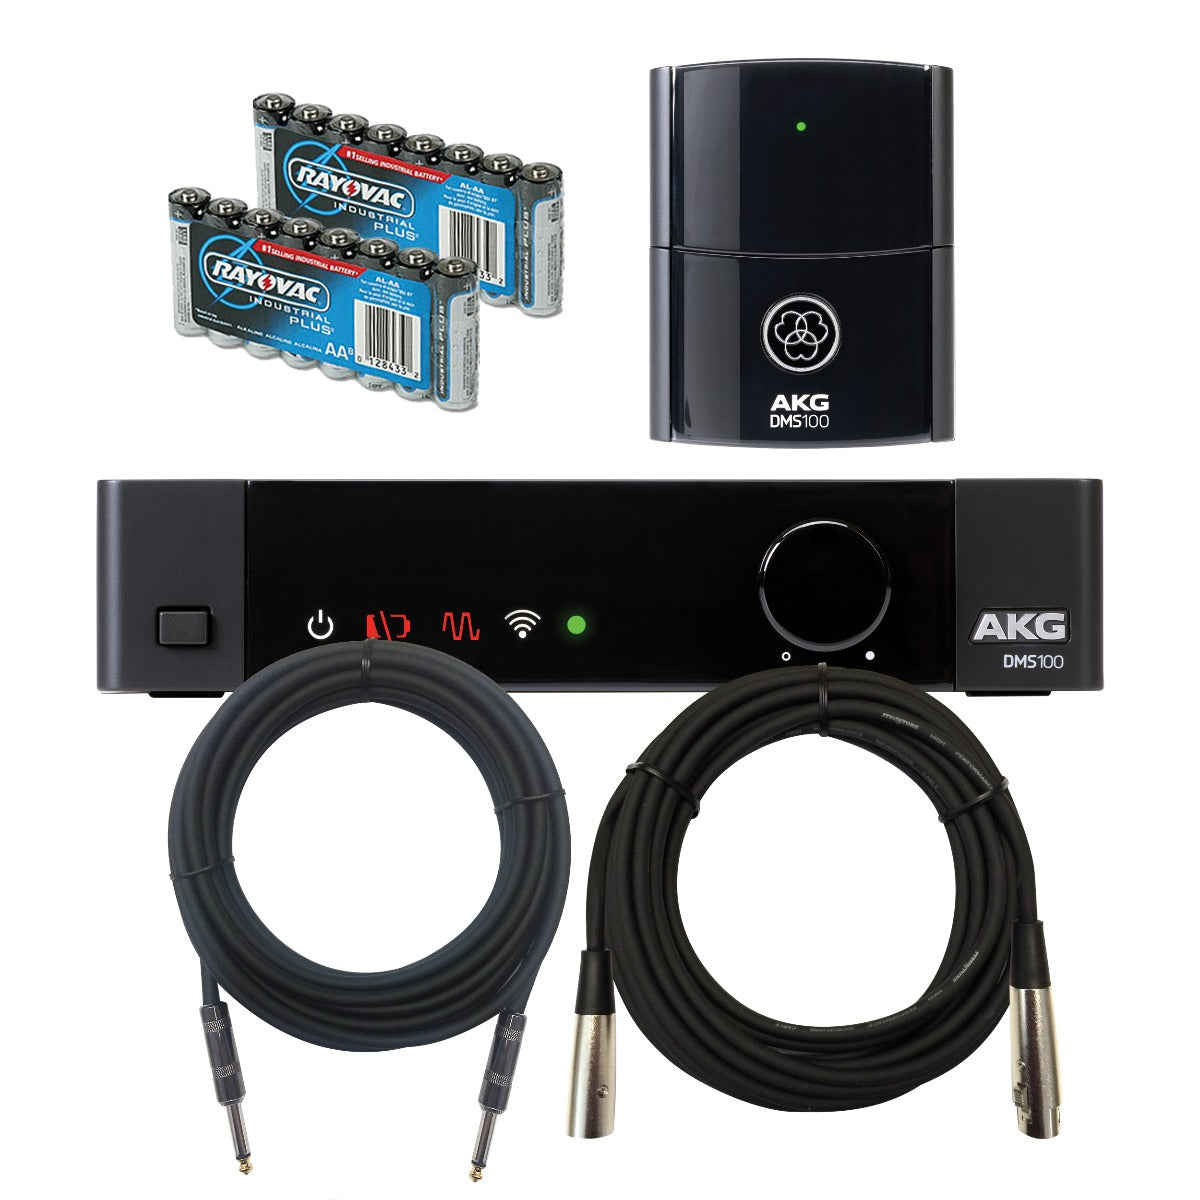 Image of the AKG DMS100 Wireless Instrument System BONUS PAK with the included batteries and cables